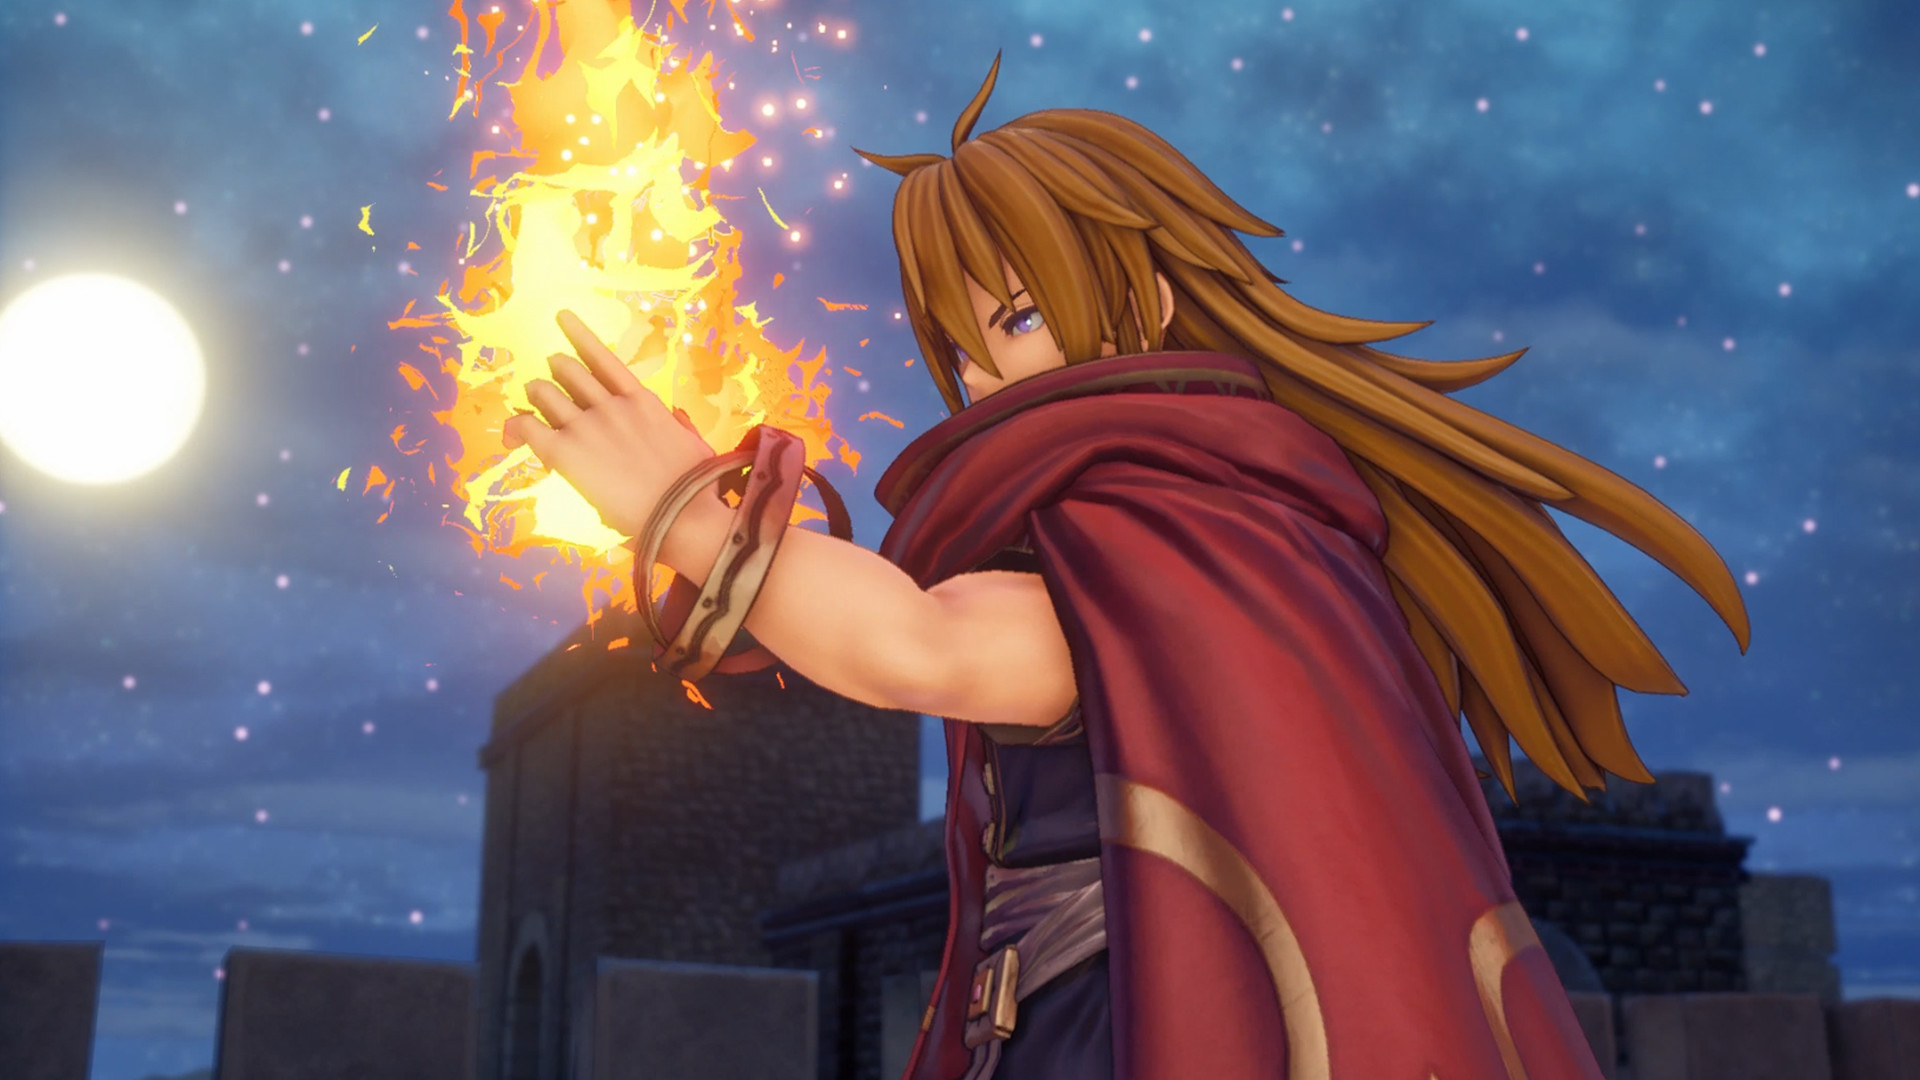 Trials of Mana STEAM•RU ⚡️AUTODELIVERY 💳0% CARDS